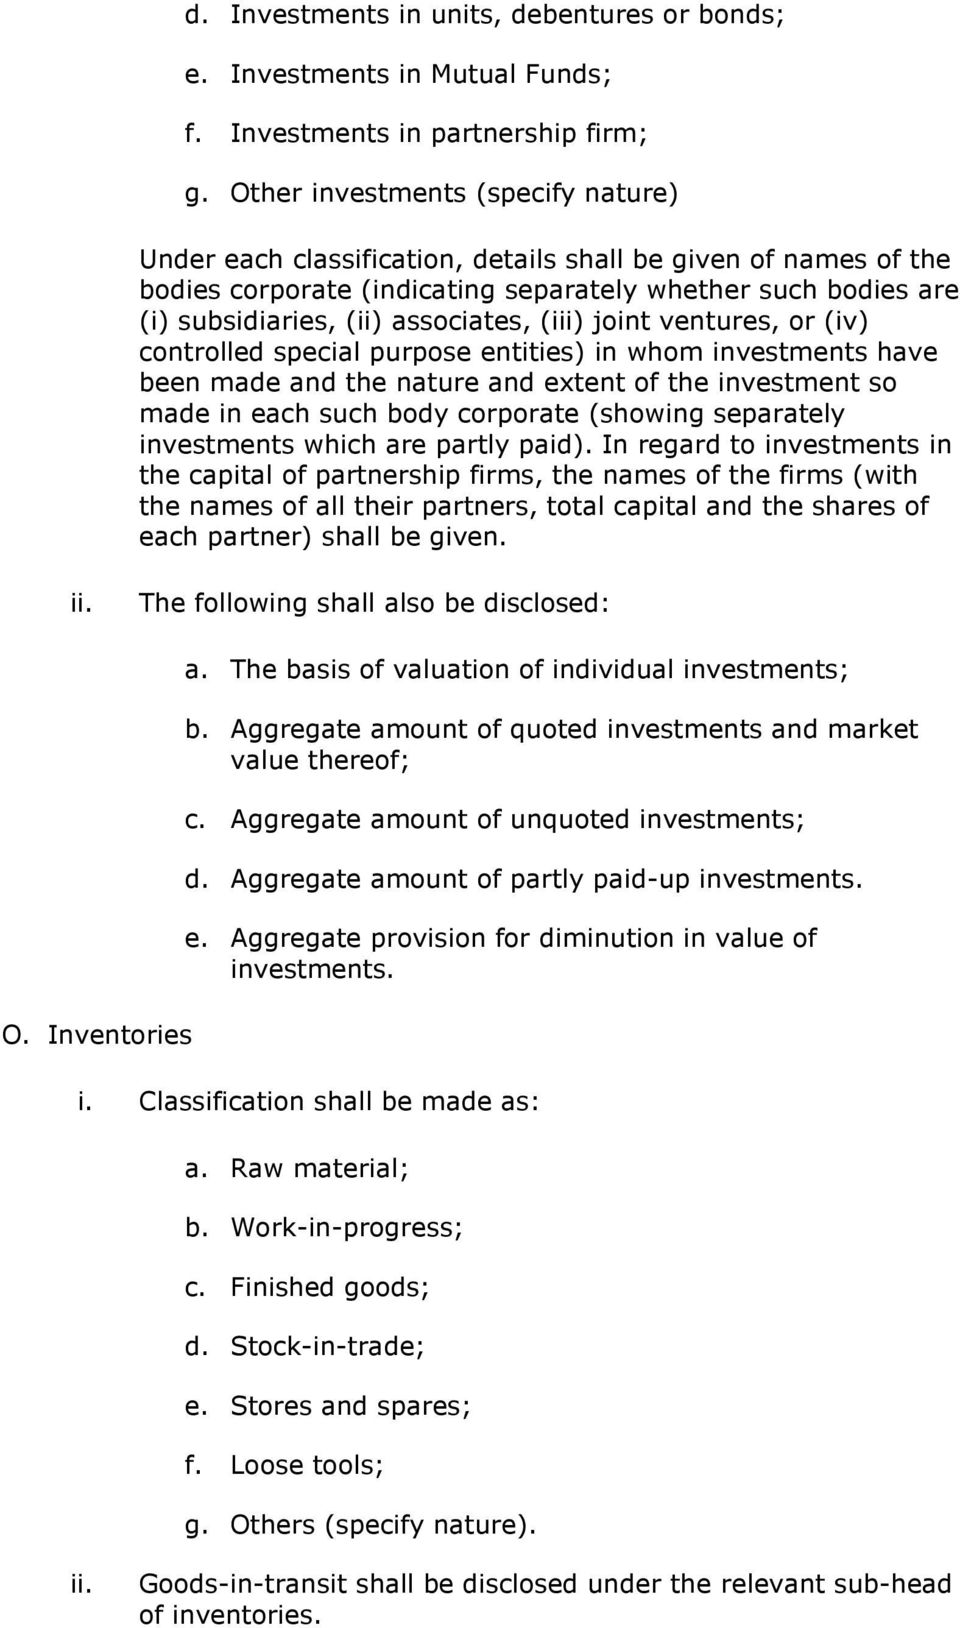 (iii) joint ventures, or (iv) controlled special purpose entities) in whom investments have been made and the nature and extent of the investment so made in each such body corporate (showing